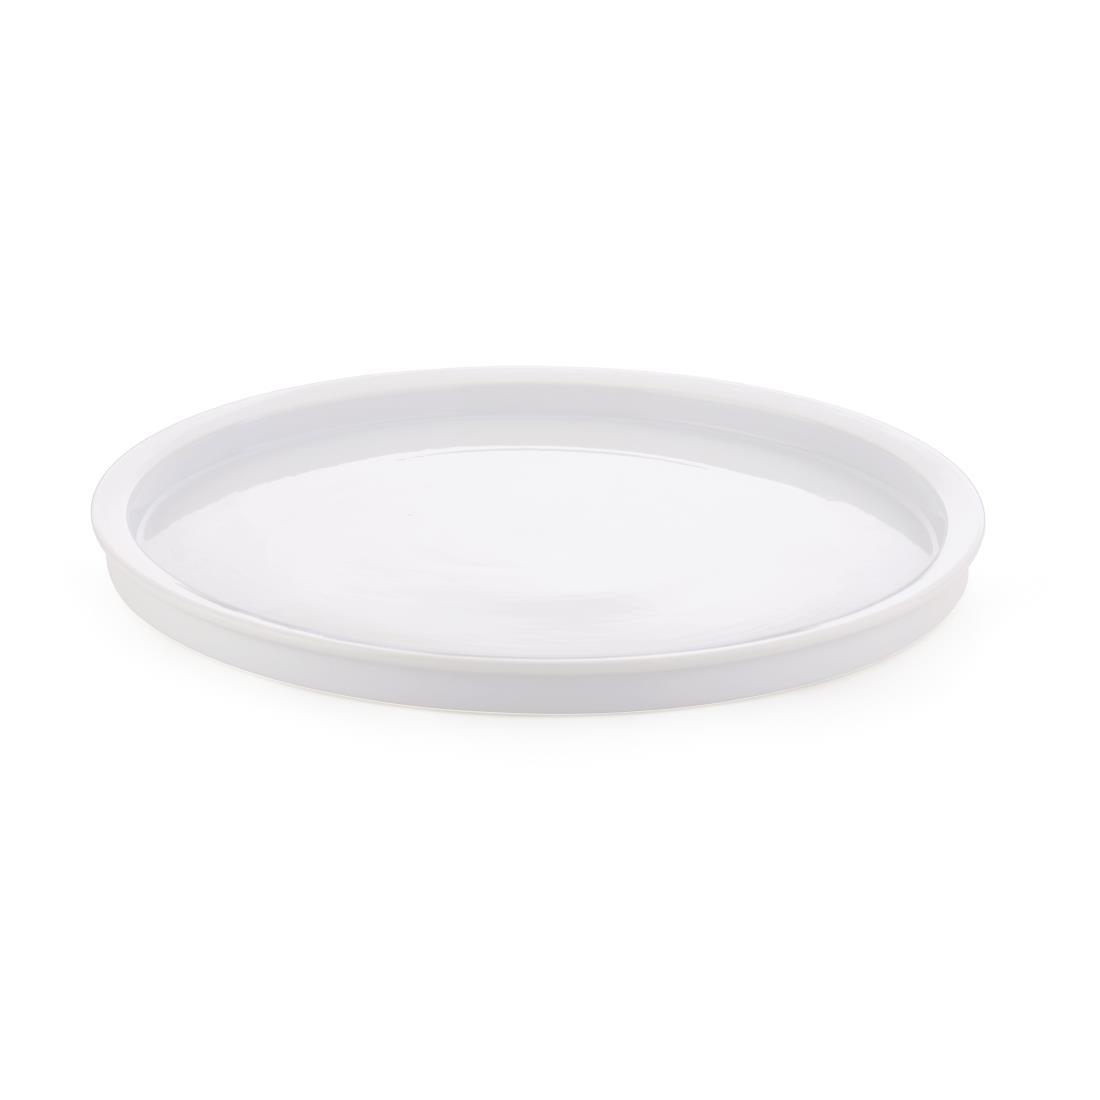 Porcelain Cheese Plate 240mm - CM749  - 2